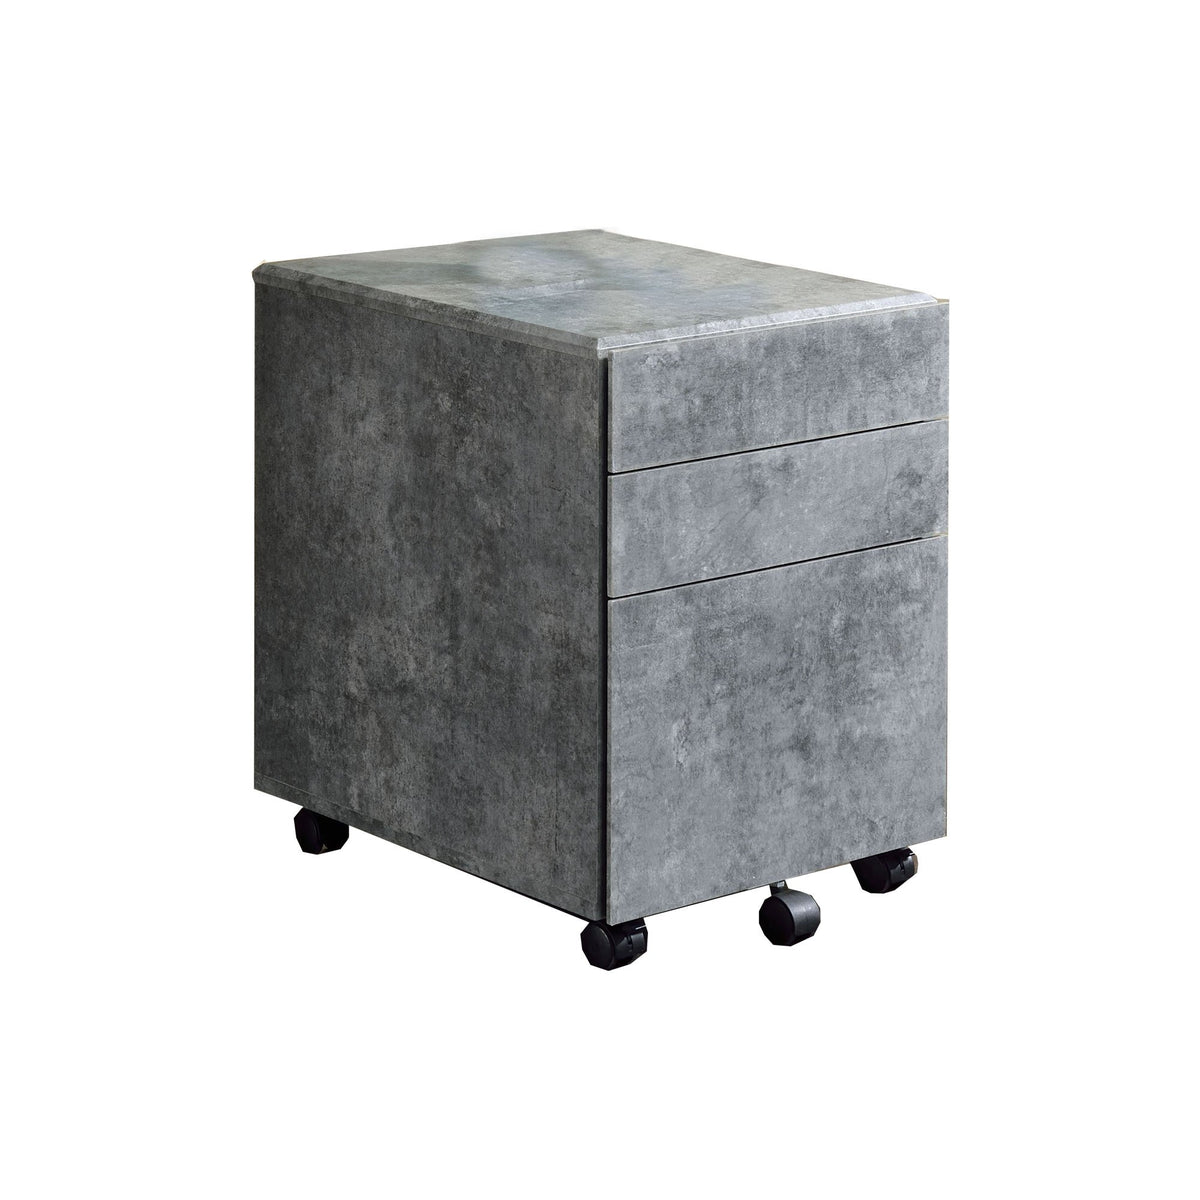 Contemporary Style File Cabinet with 3 Storage Drawers and Casters, Gray - BM209627